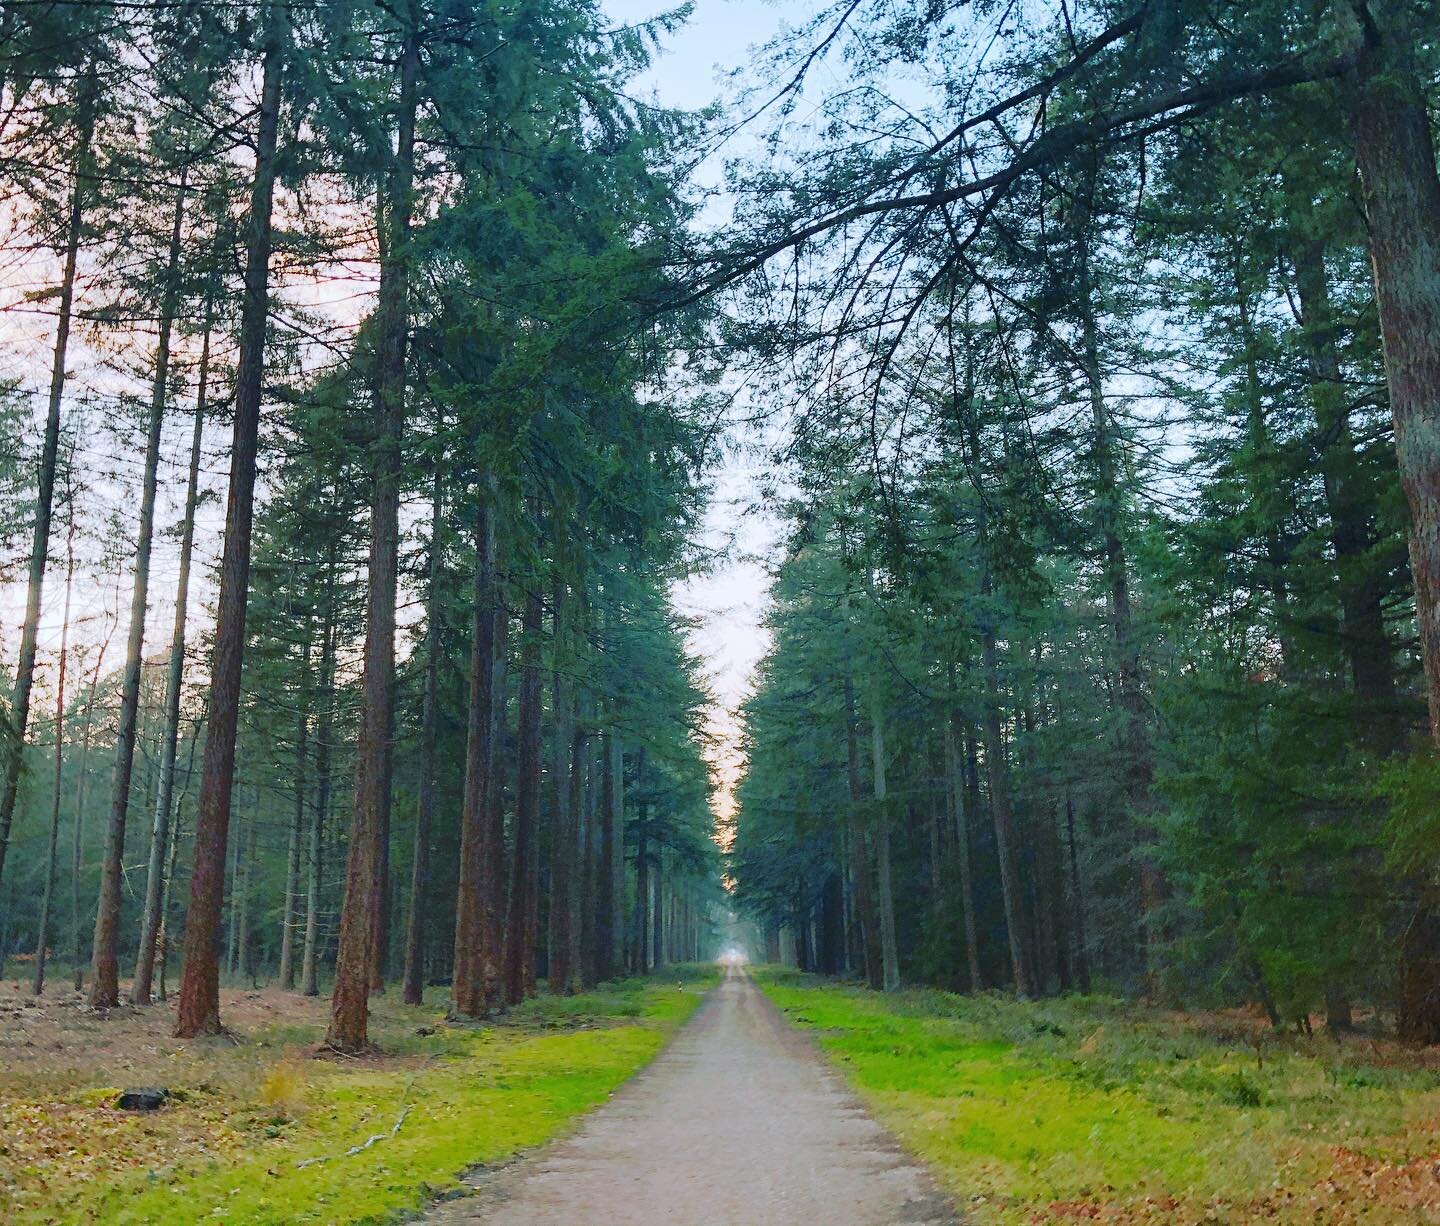 I took this photo during our walk in the forest as it gives me hope, peace and a journey to look forward to✨⁣
⁣
Yesterday we got some bad news, The Netherlands entered lockdown again. The array of emotions and feelings I felt are way too long to desc